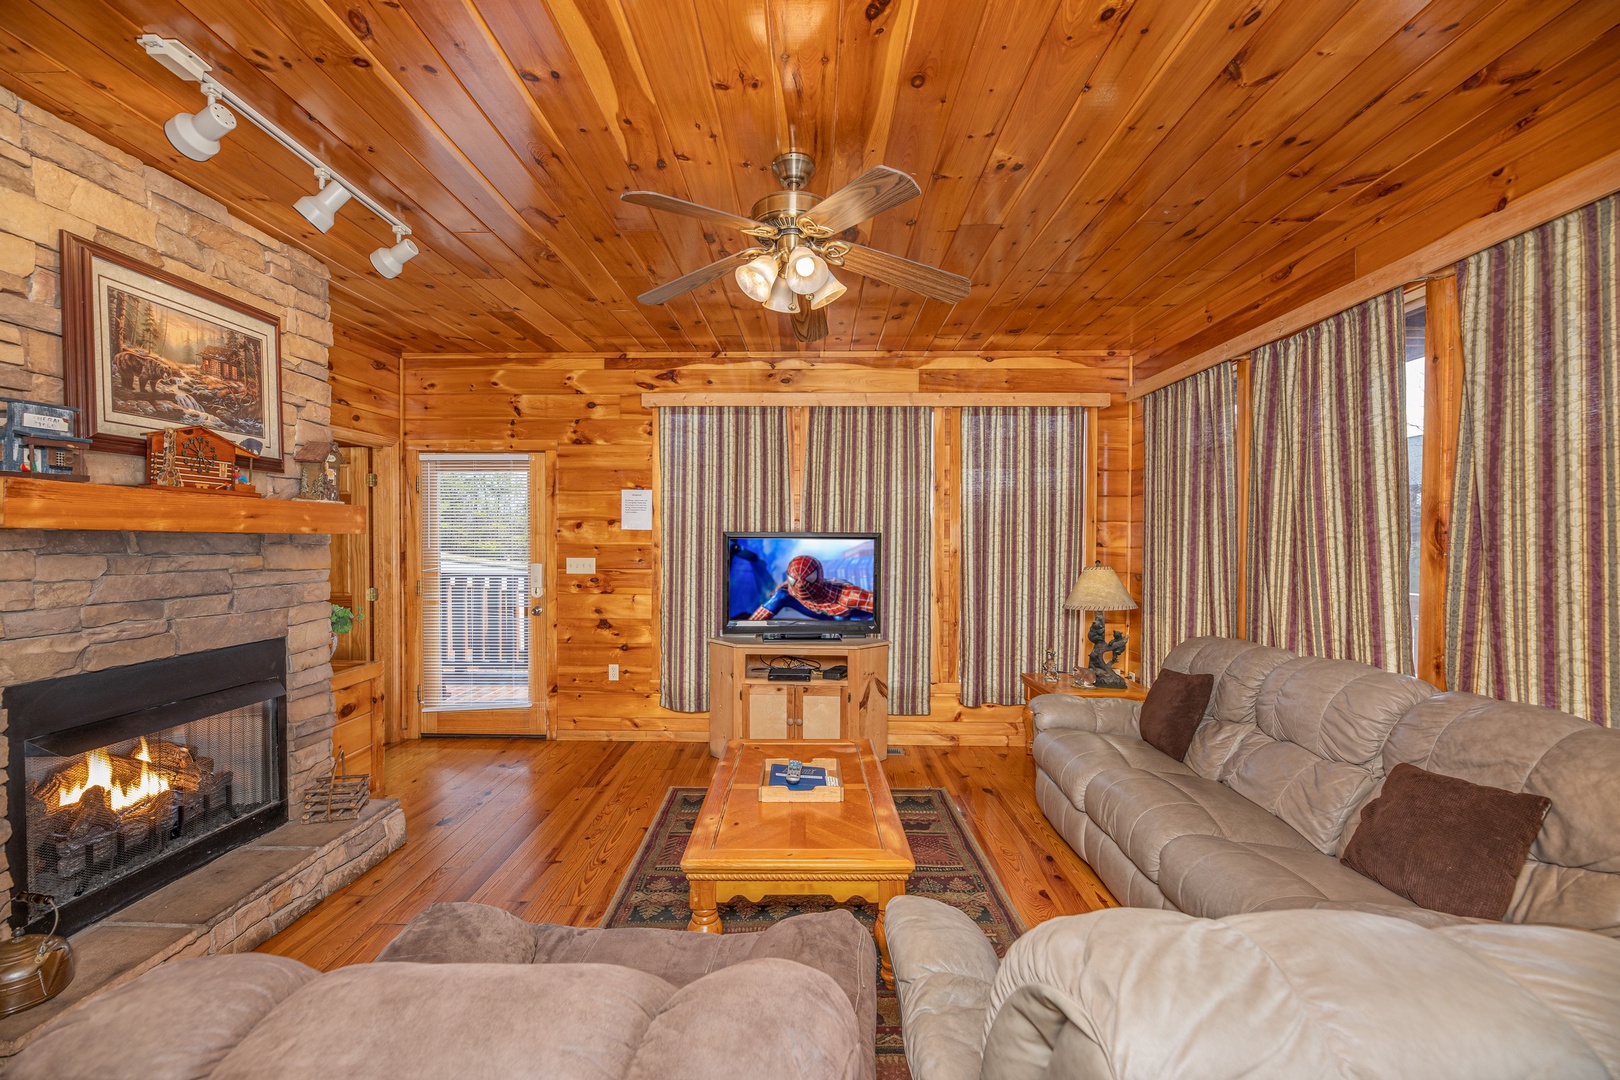 Main living room with TV, fireplace, and seating at Hickernut Lodge, a 5-bedroom cabin rental located in Pigeon Forge